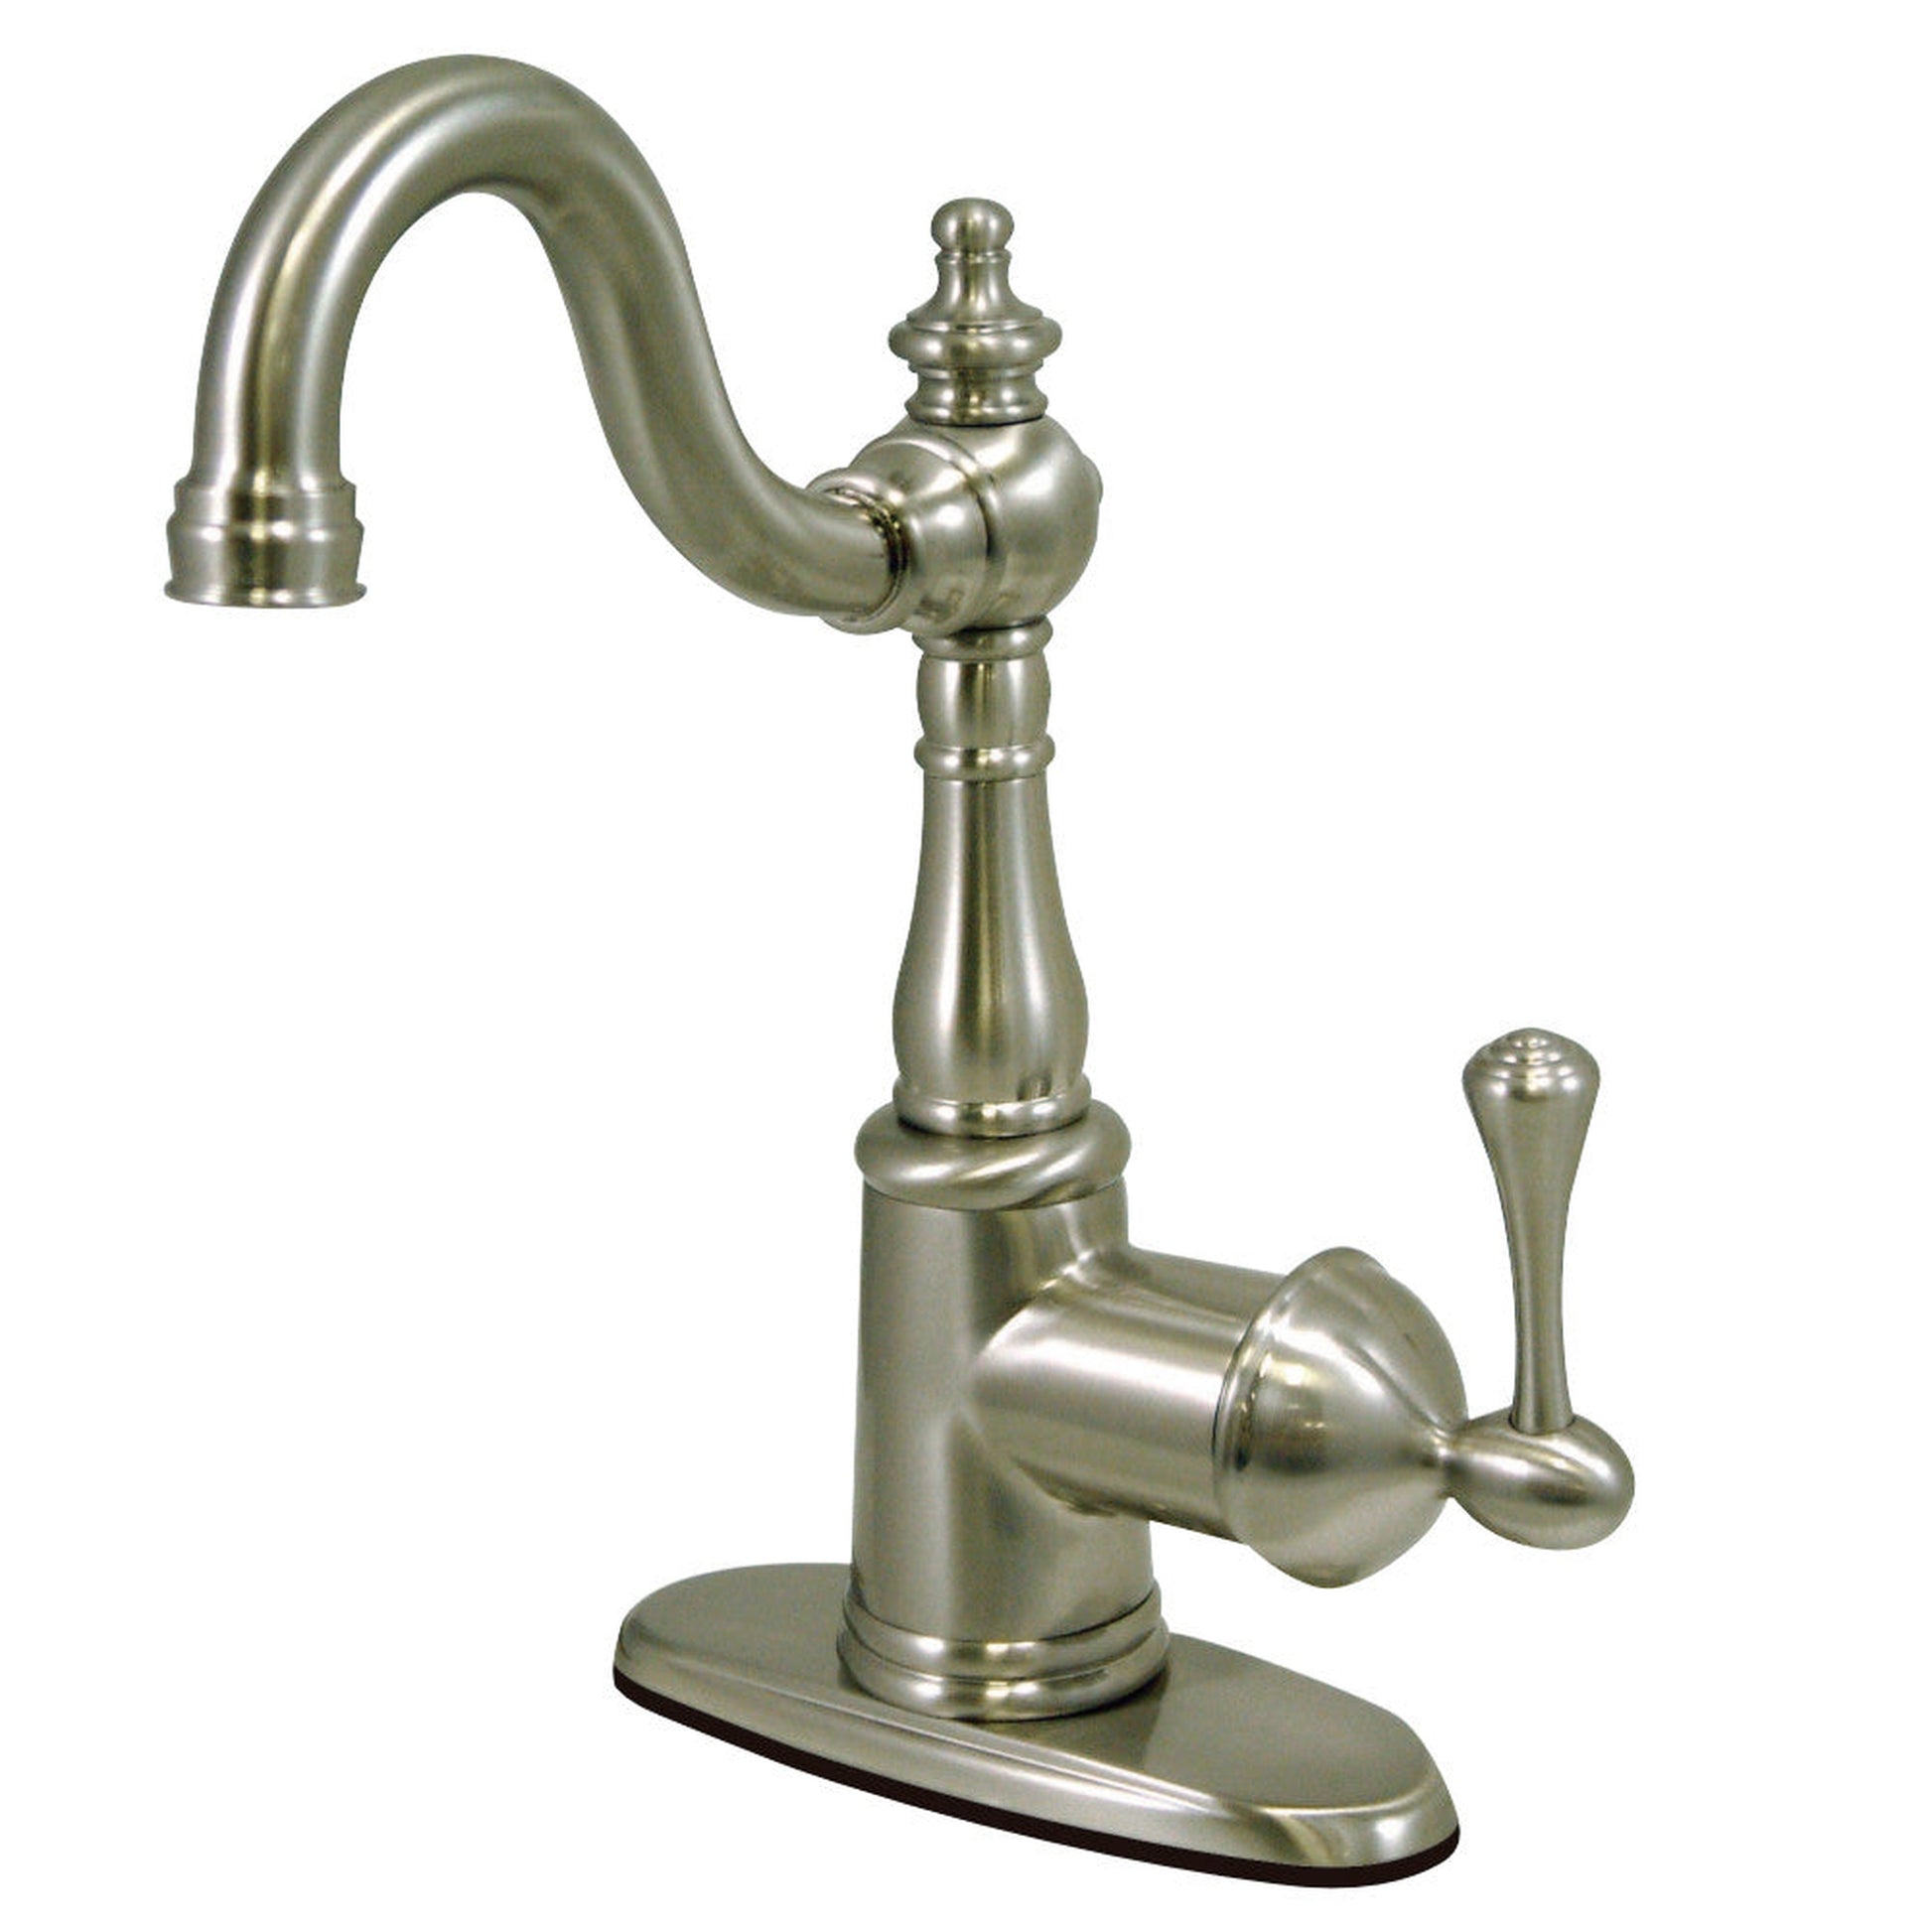 Fauceture FS7648BL Single-Handle 4 in. Centerset Bathroom Faucet, Brushed Nickel